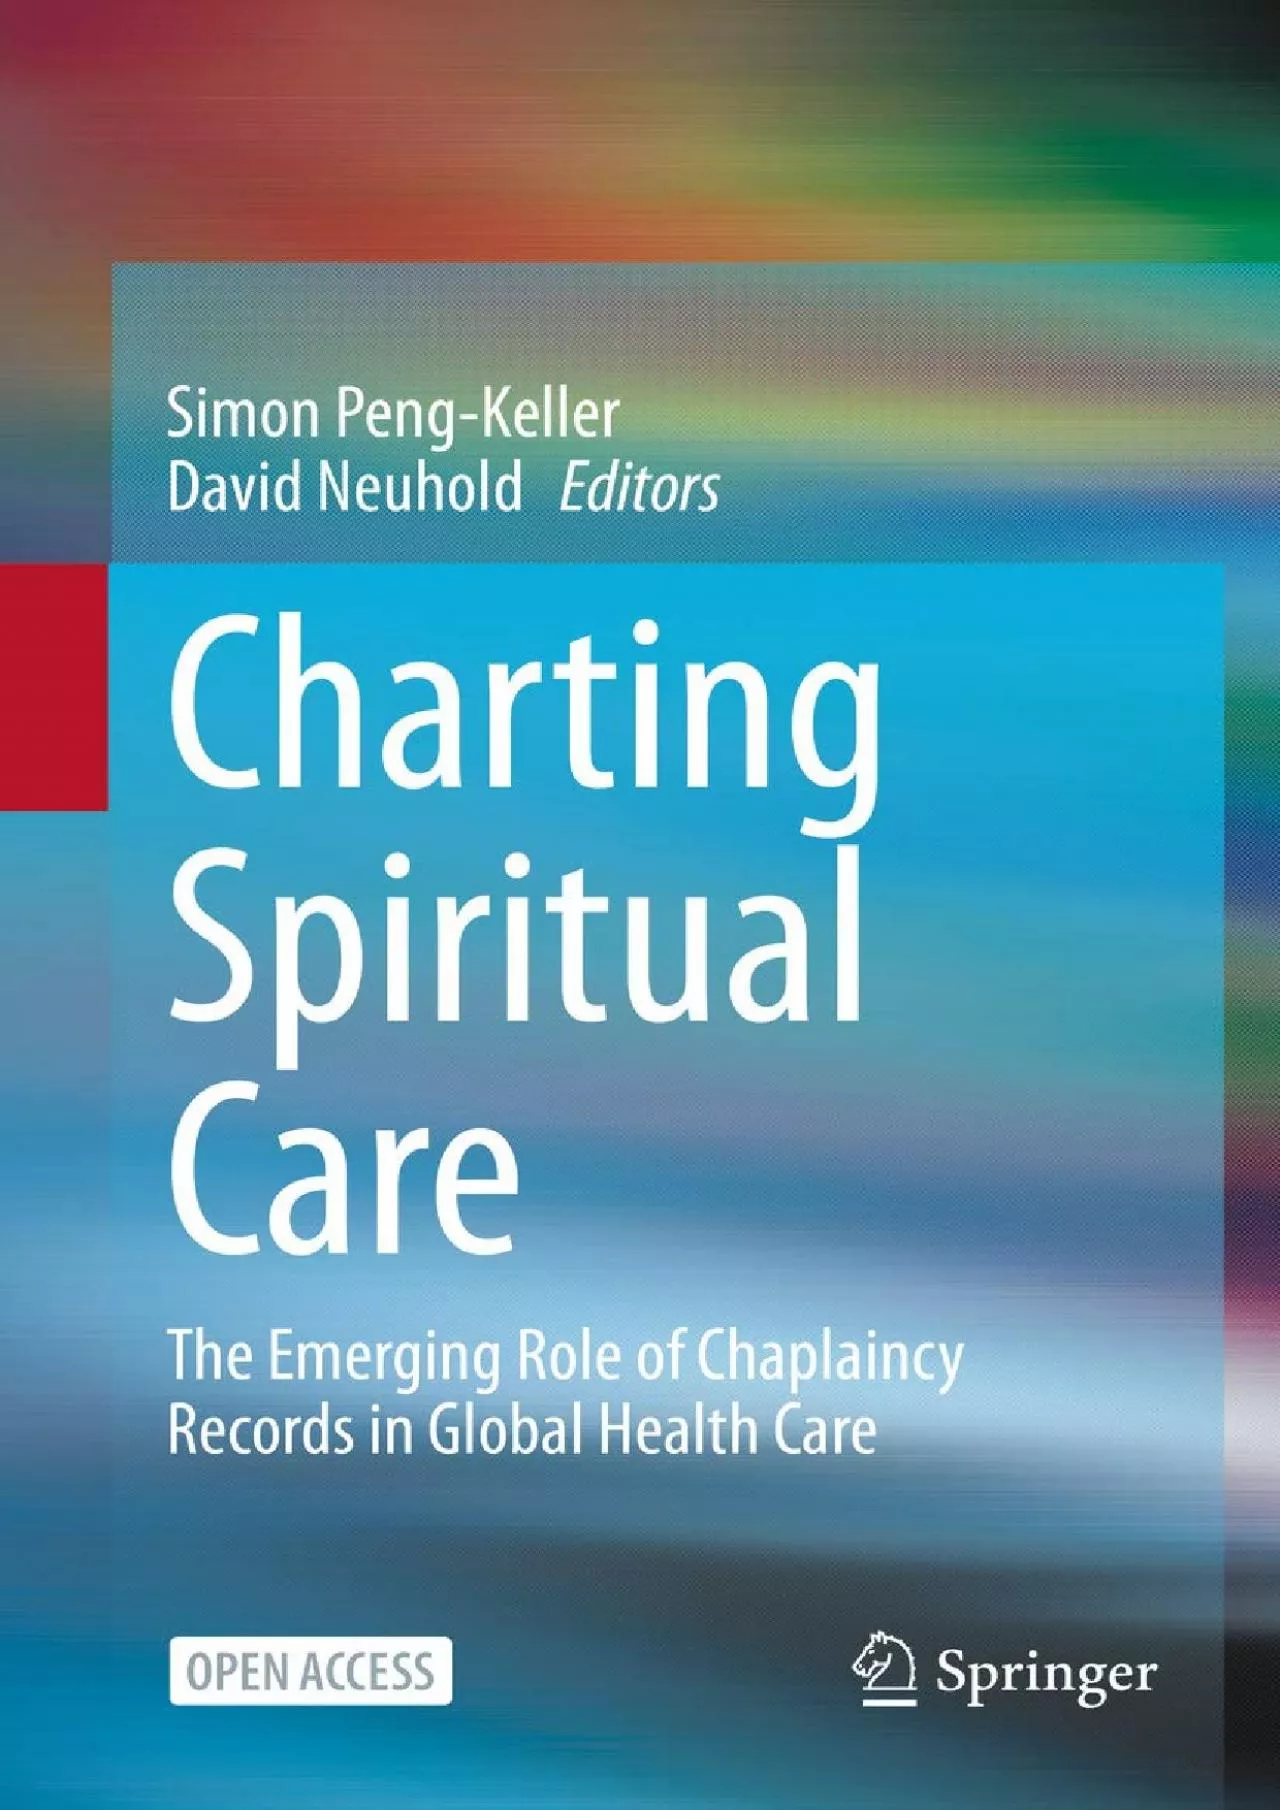 (BOOS)-Charting Spiritual Care: The Emerging Role of Chaplaincy Records in Global Health